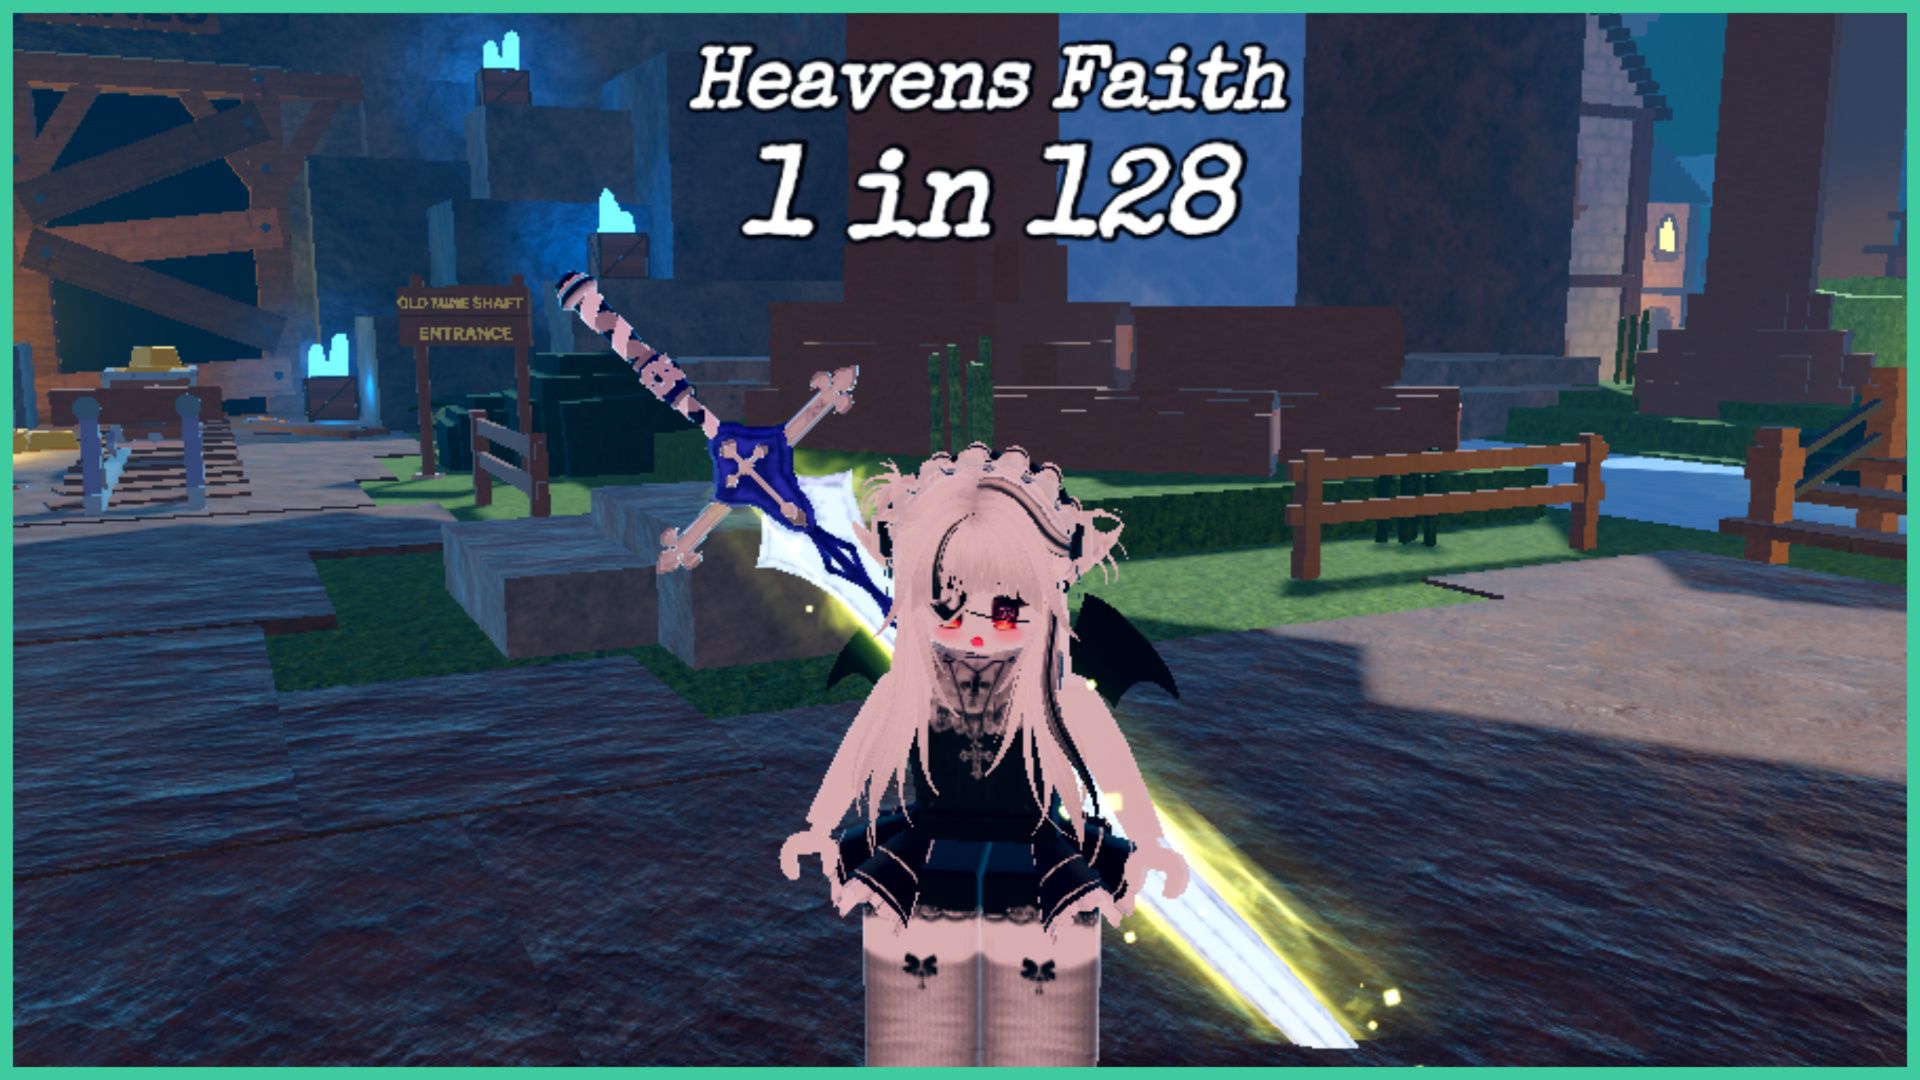 feature image for our blades of chance quests guide, the image features a screenshot from the game of a roblox player with the heavens faith sword strapped to their back , which has a yellow glow around it as they stand close by to a closed mine boarded up with wooden planks